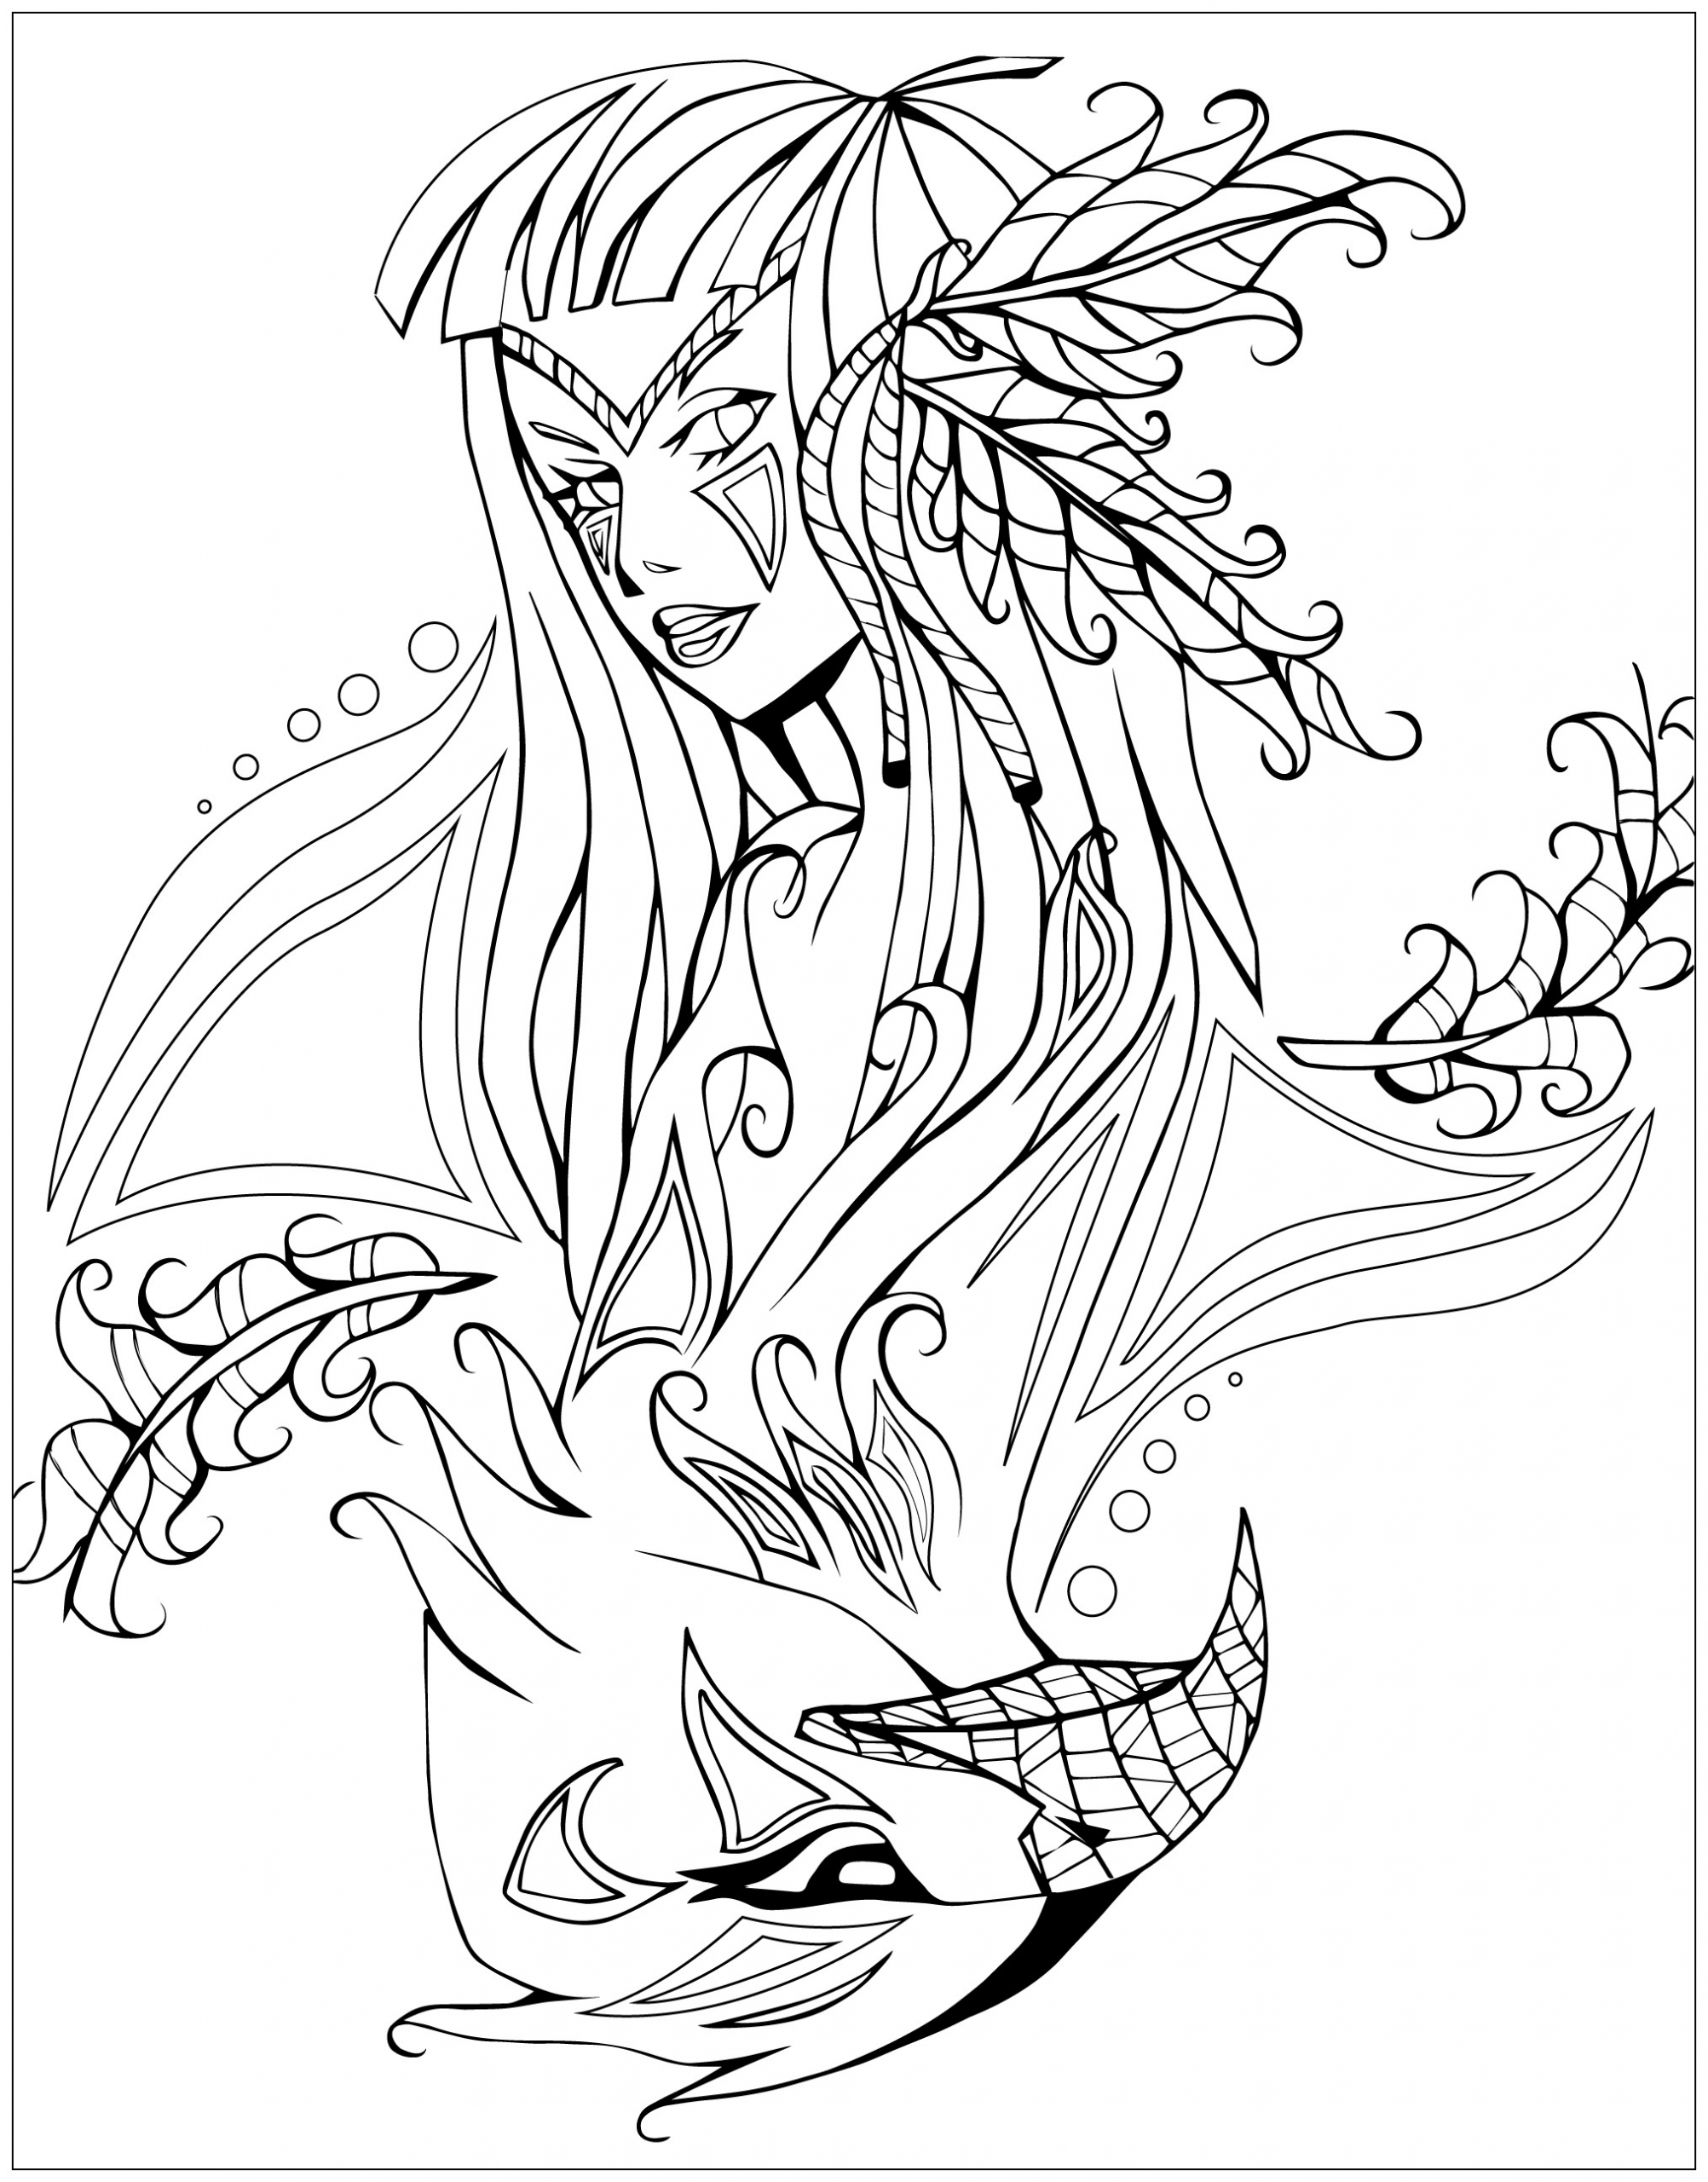 Indian Coloring Pages For Adults
 Native american indian savage spirit Native American